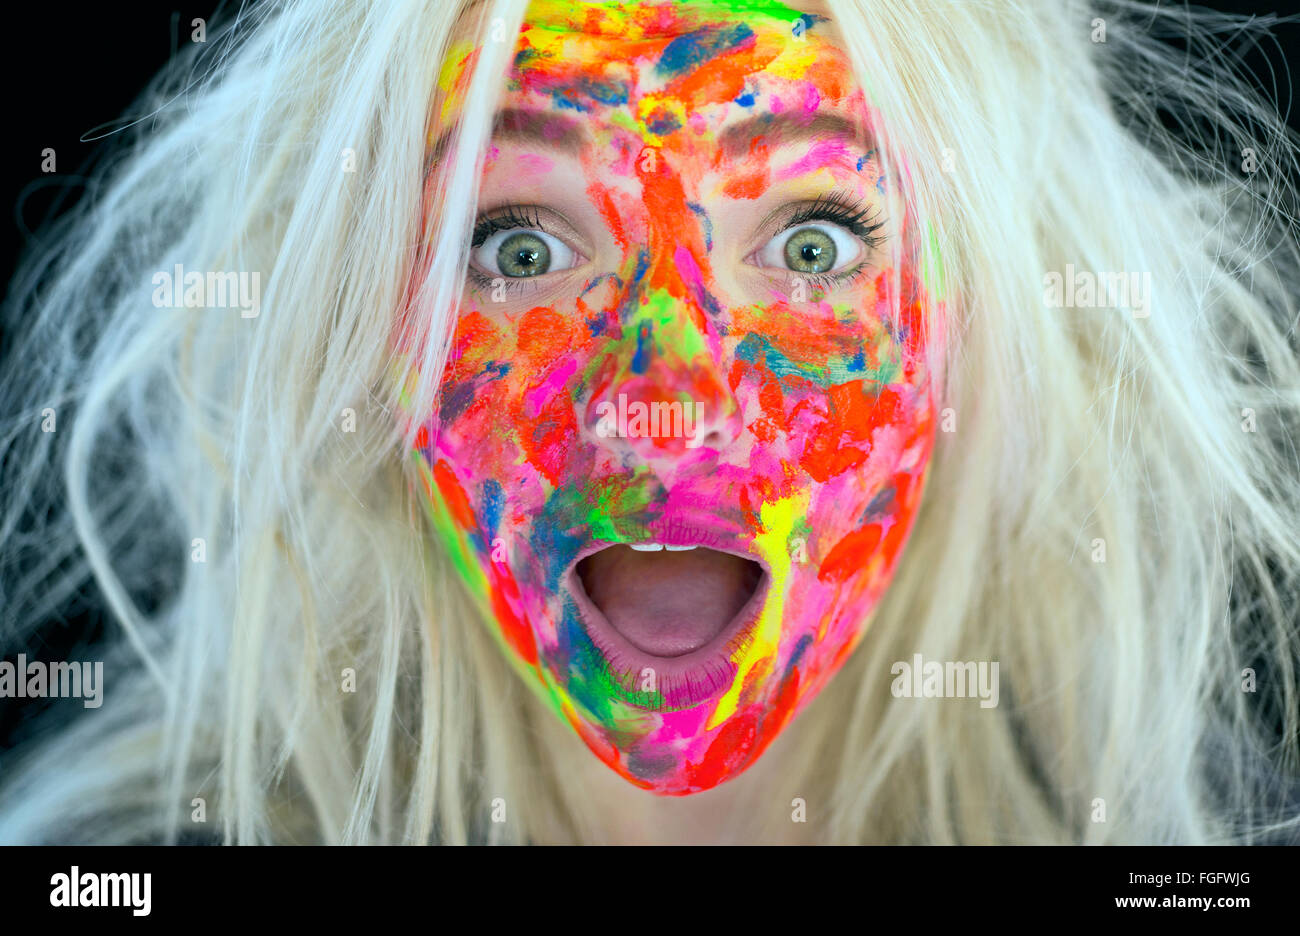 Woman with messy blonde hair and face covered in multi coloured paint with a surprised expression Stock Photo